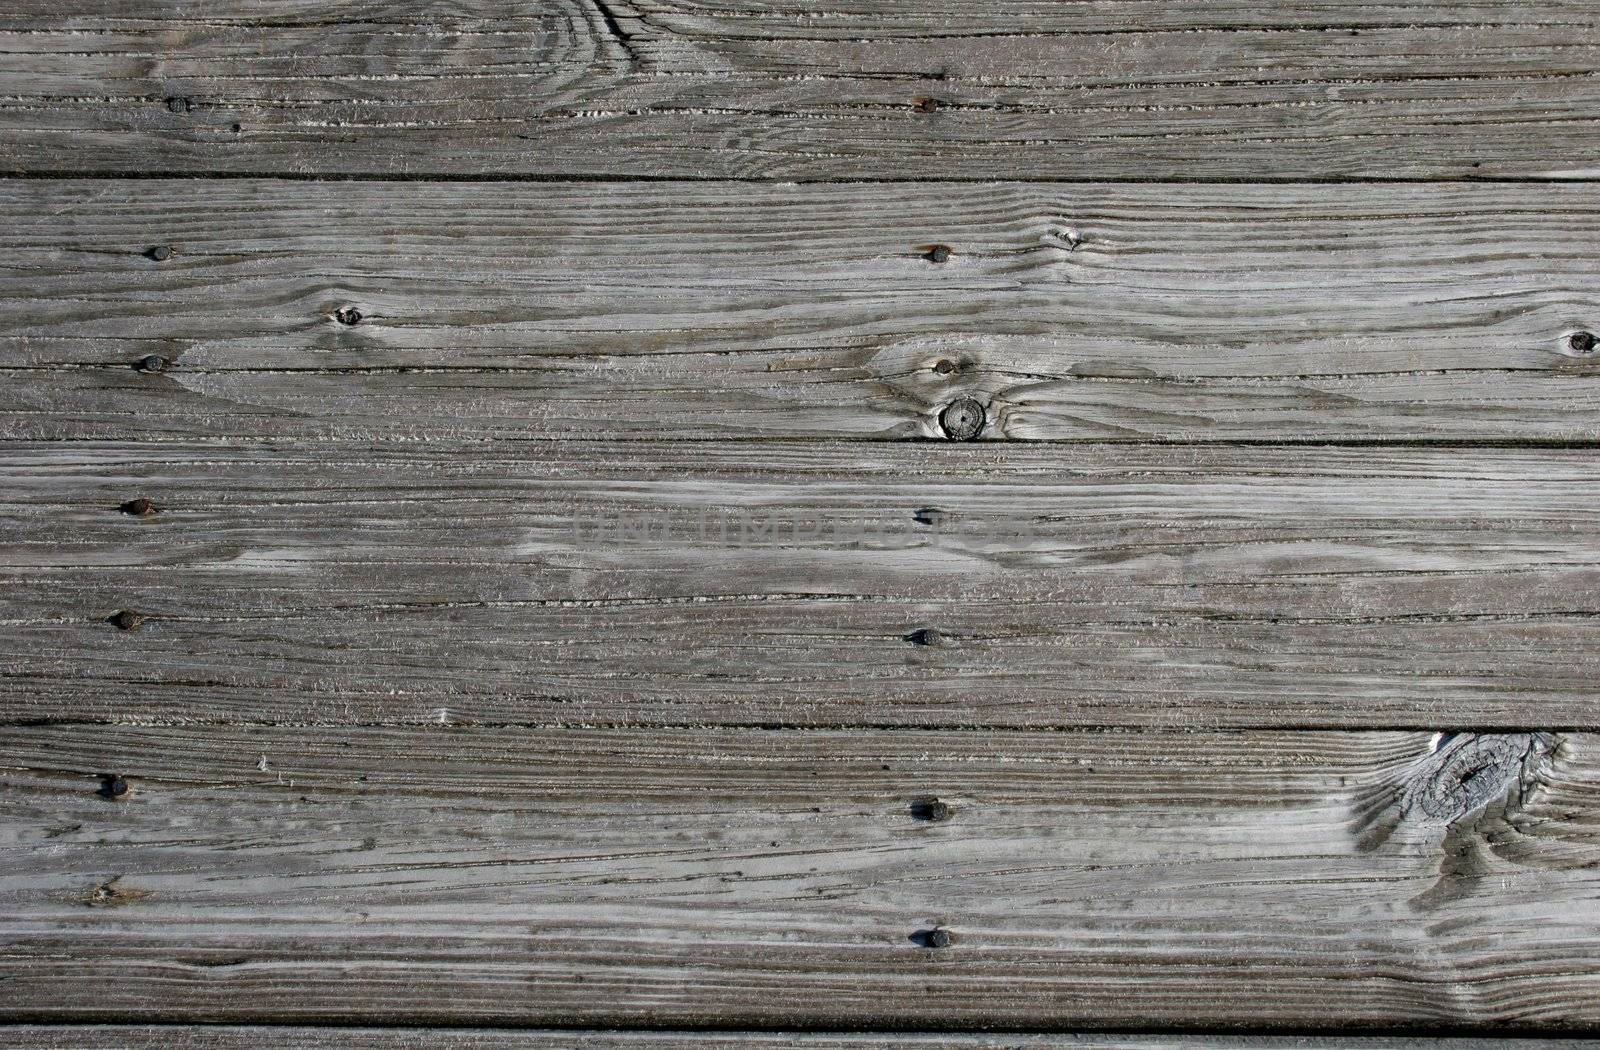 Close up of sandy, weathered planks on beach walkway